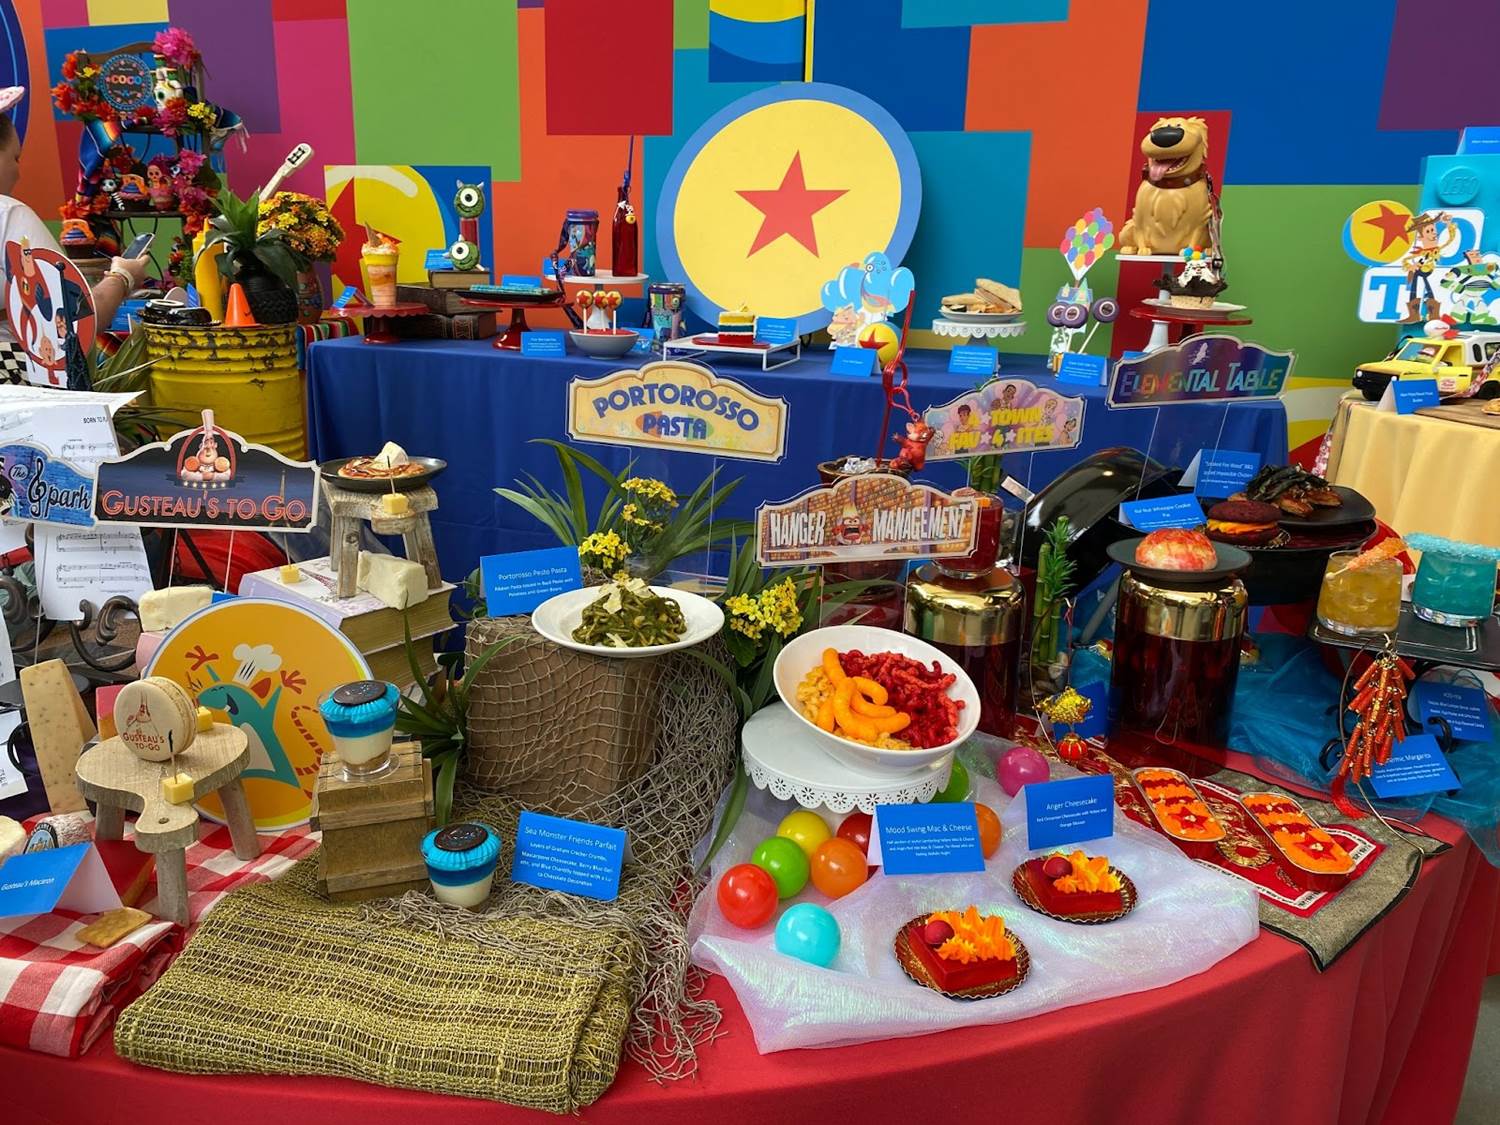 Photos: Pixar Fest Food and Beverage Items by Franchise